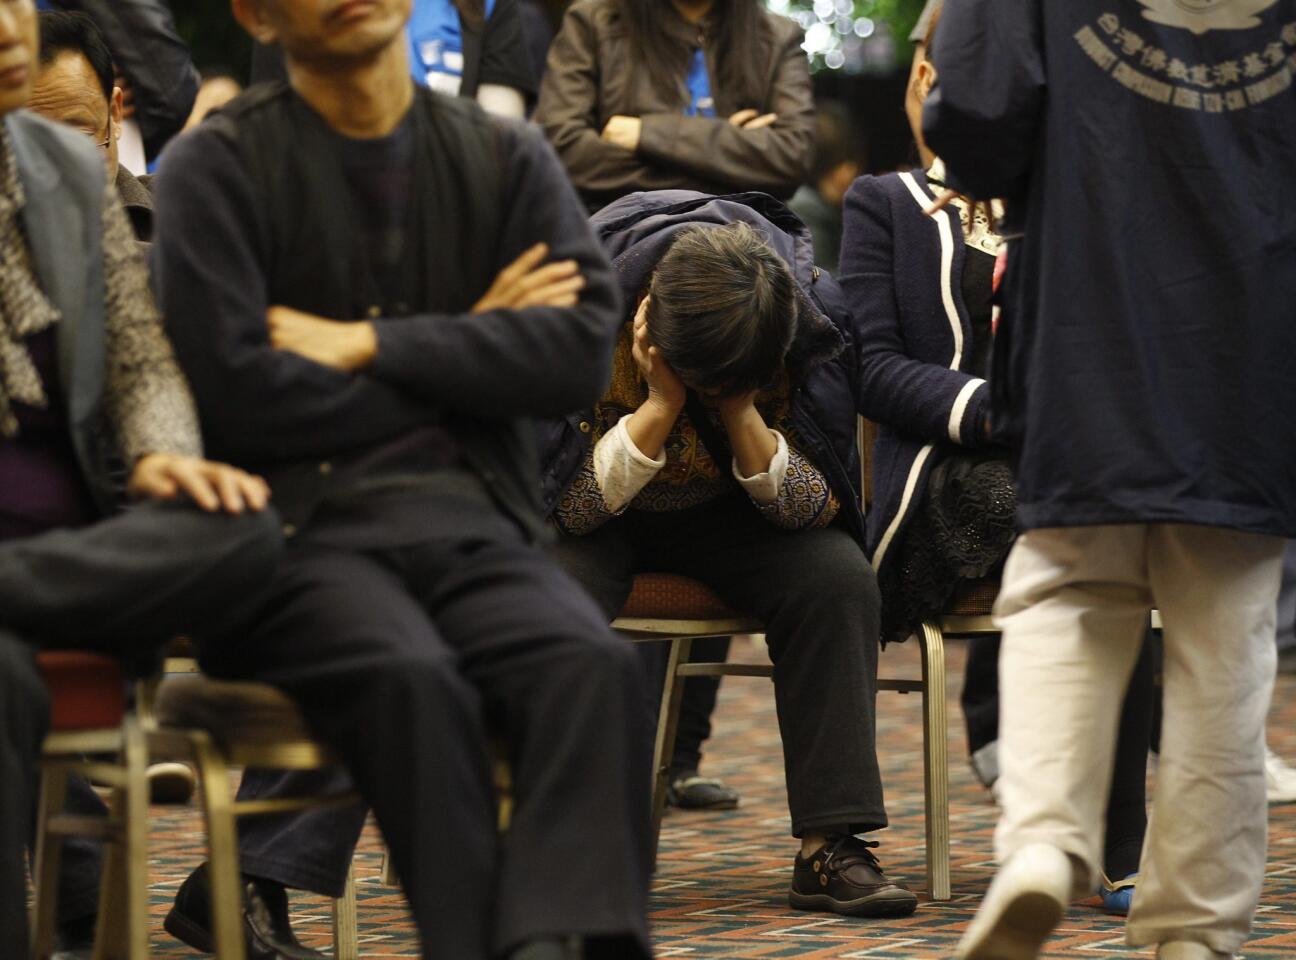 A relative of passengers of a missing Malaysia Airlines plane rests on a chair at a hotel meeting room in Beijing, China.